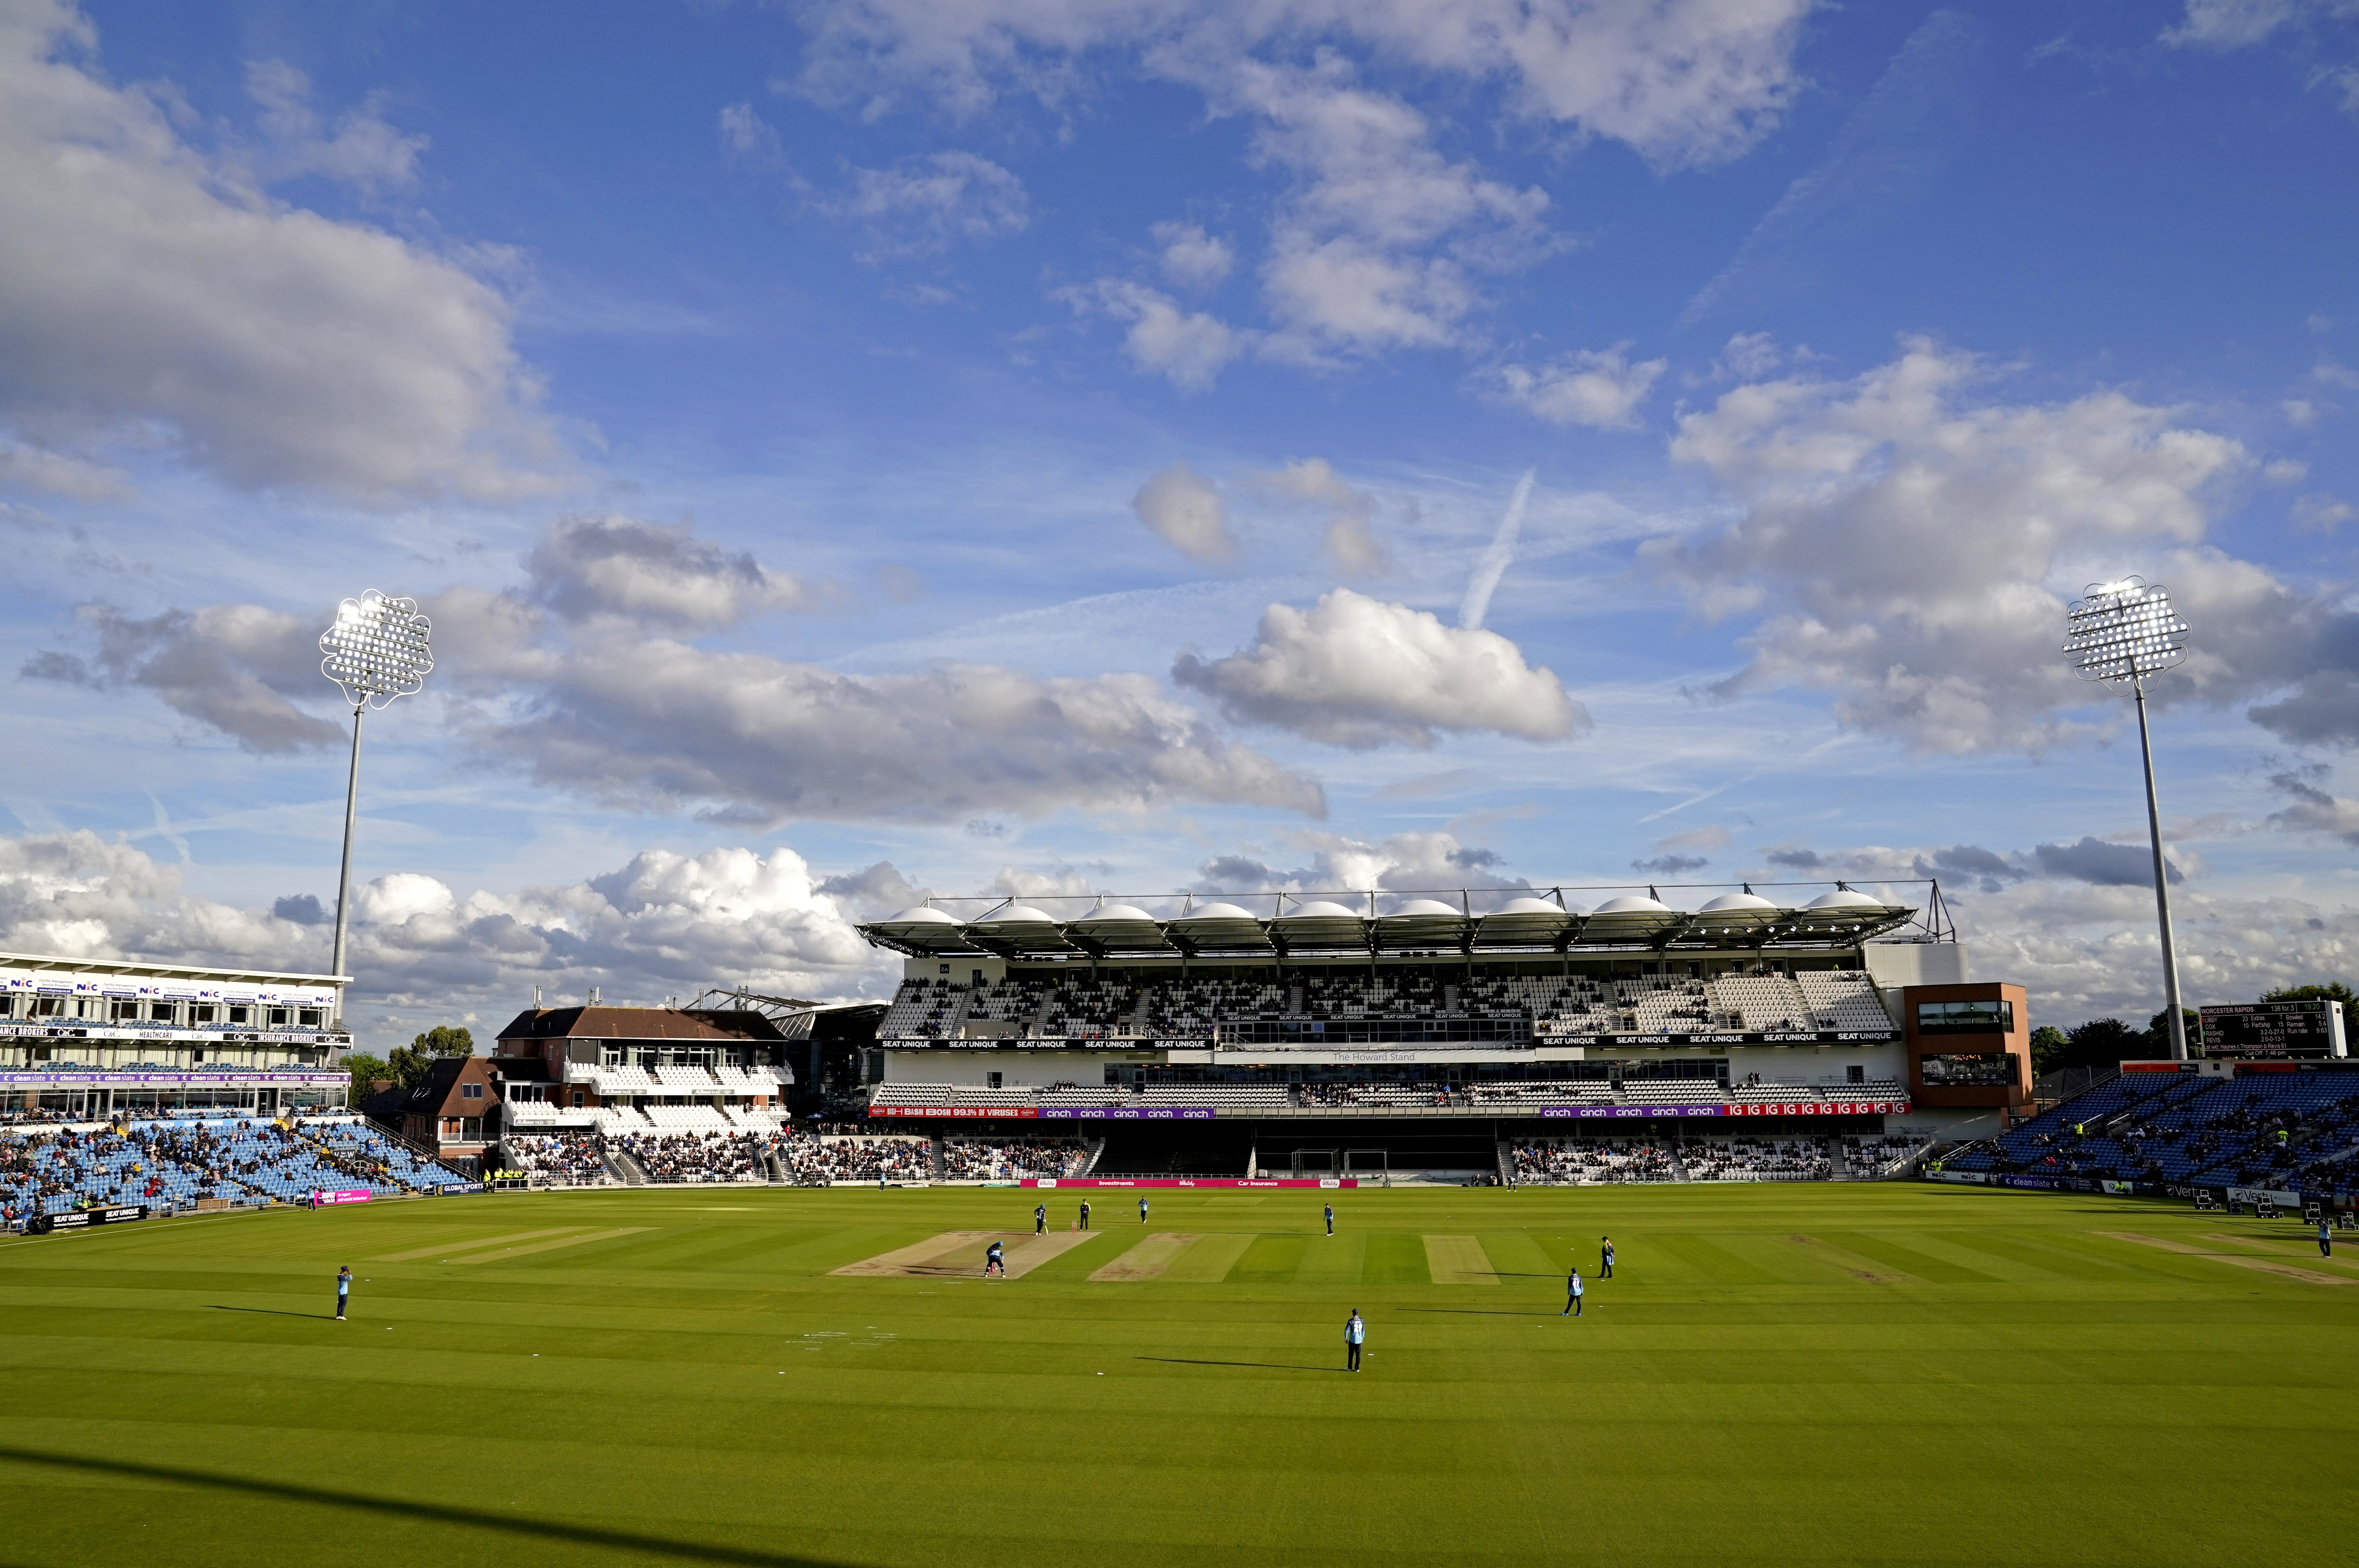 Headingley was briefly denied the right to host England matches amid the racism scandal (Danny Lawson/PA)